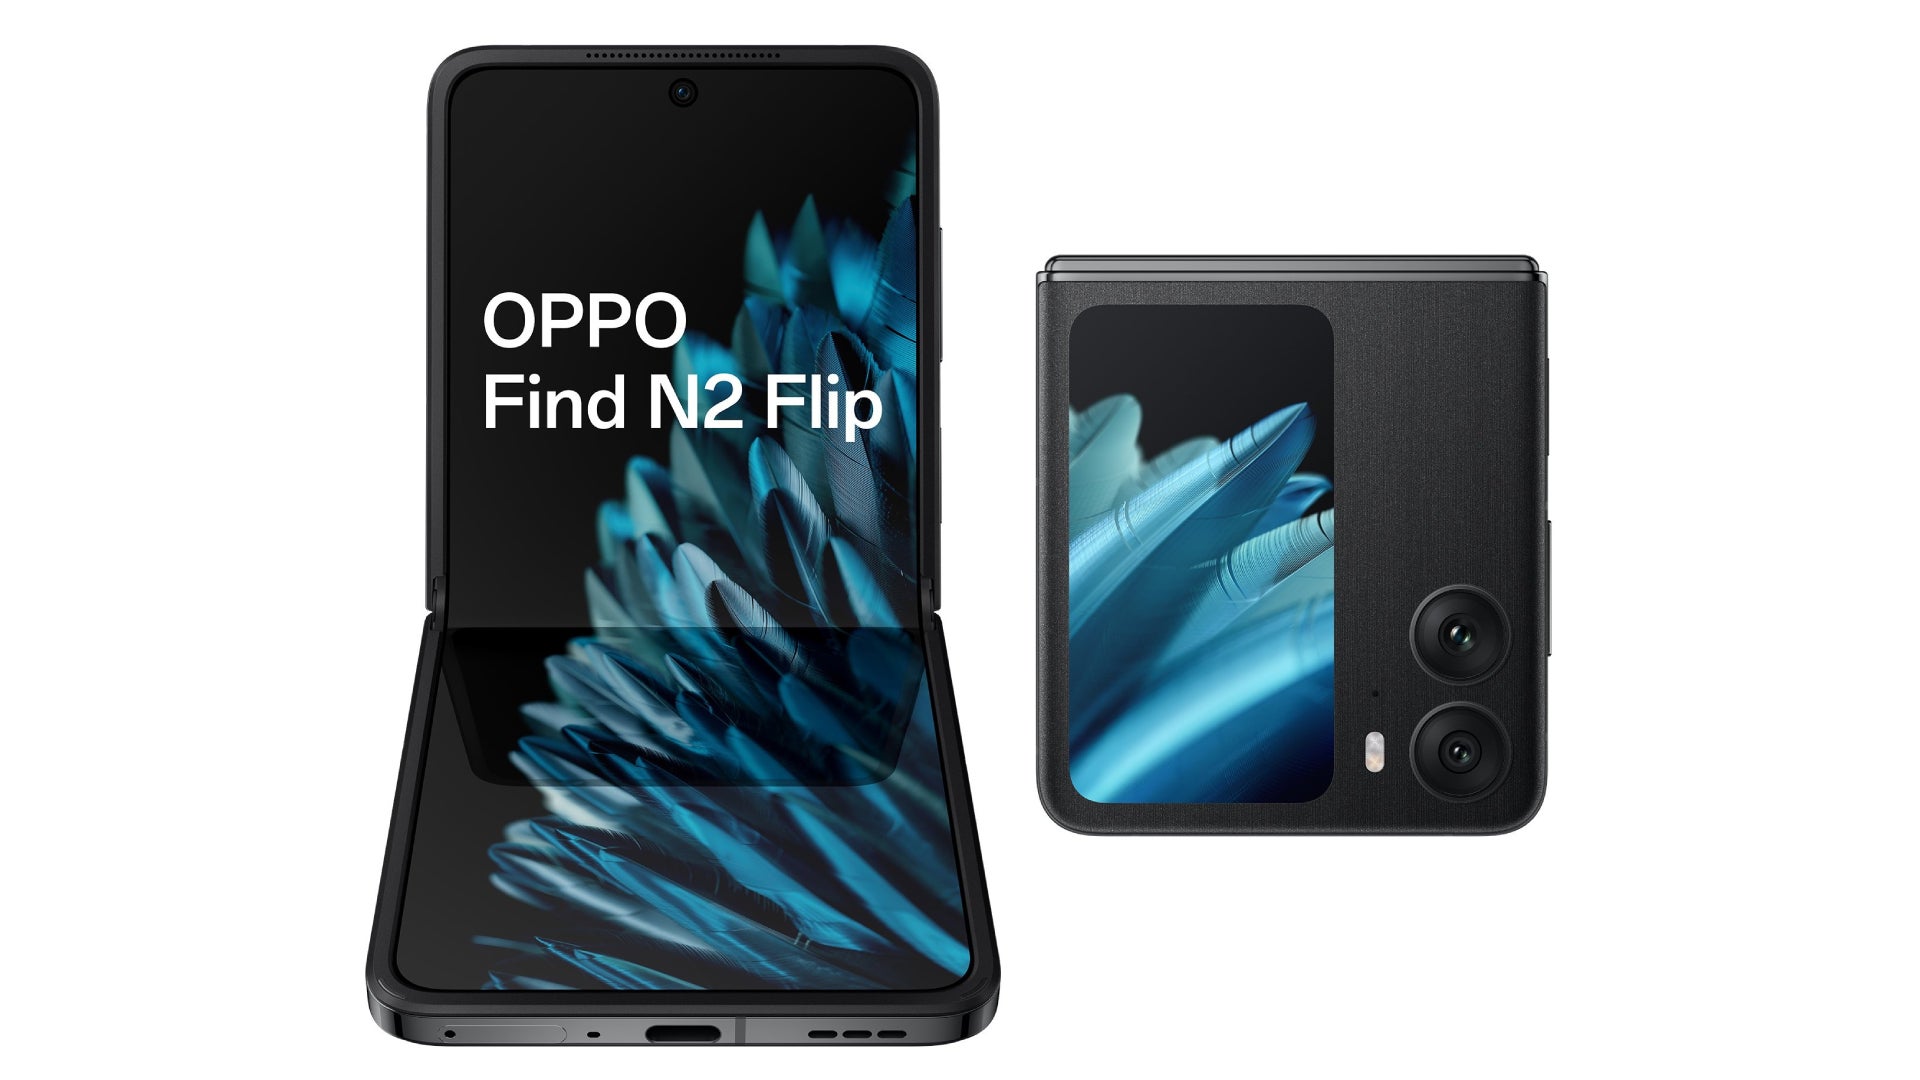 The Oppo Find N2 price in Europe has leaked before its international launch